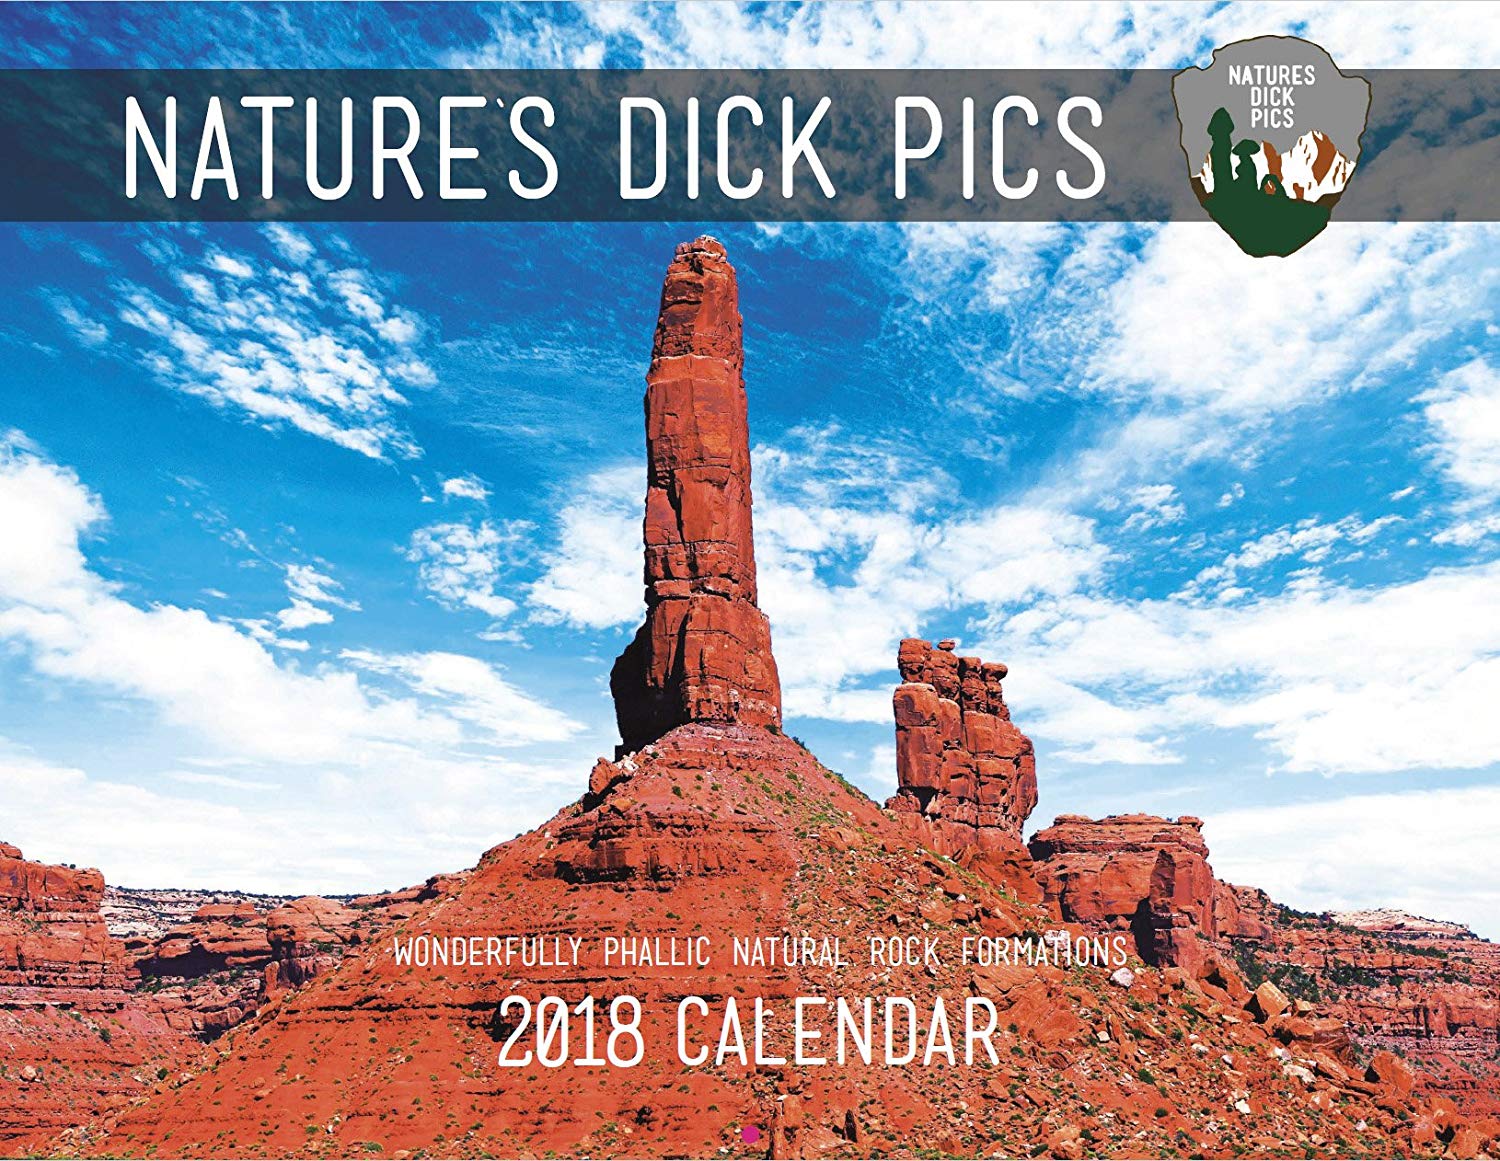 This wall calendar exposes the more manly side of nature. Get it for <a href="https://amzn.to/2Btba9o">$19.99</a>.